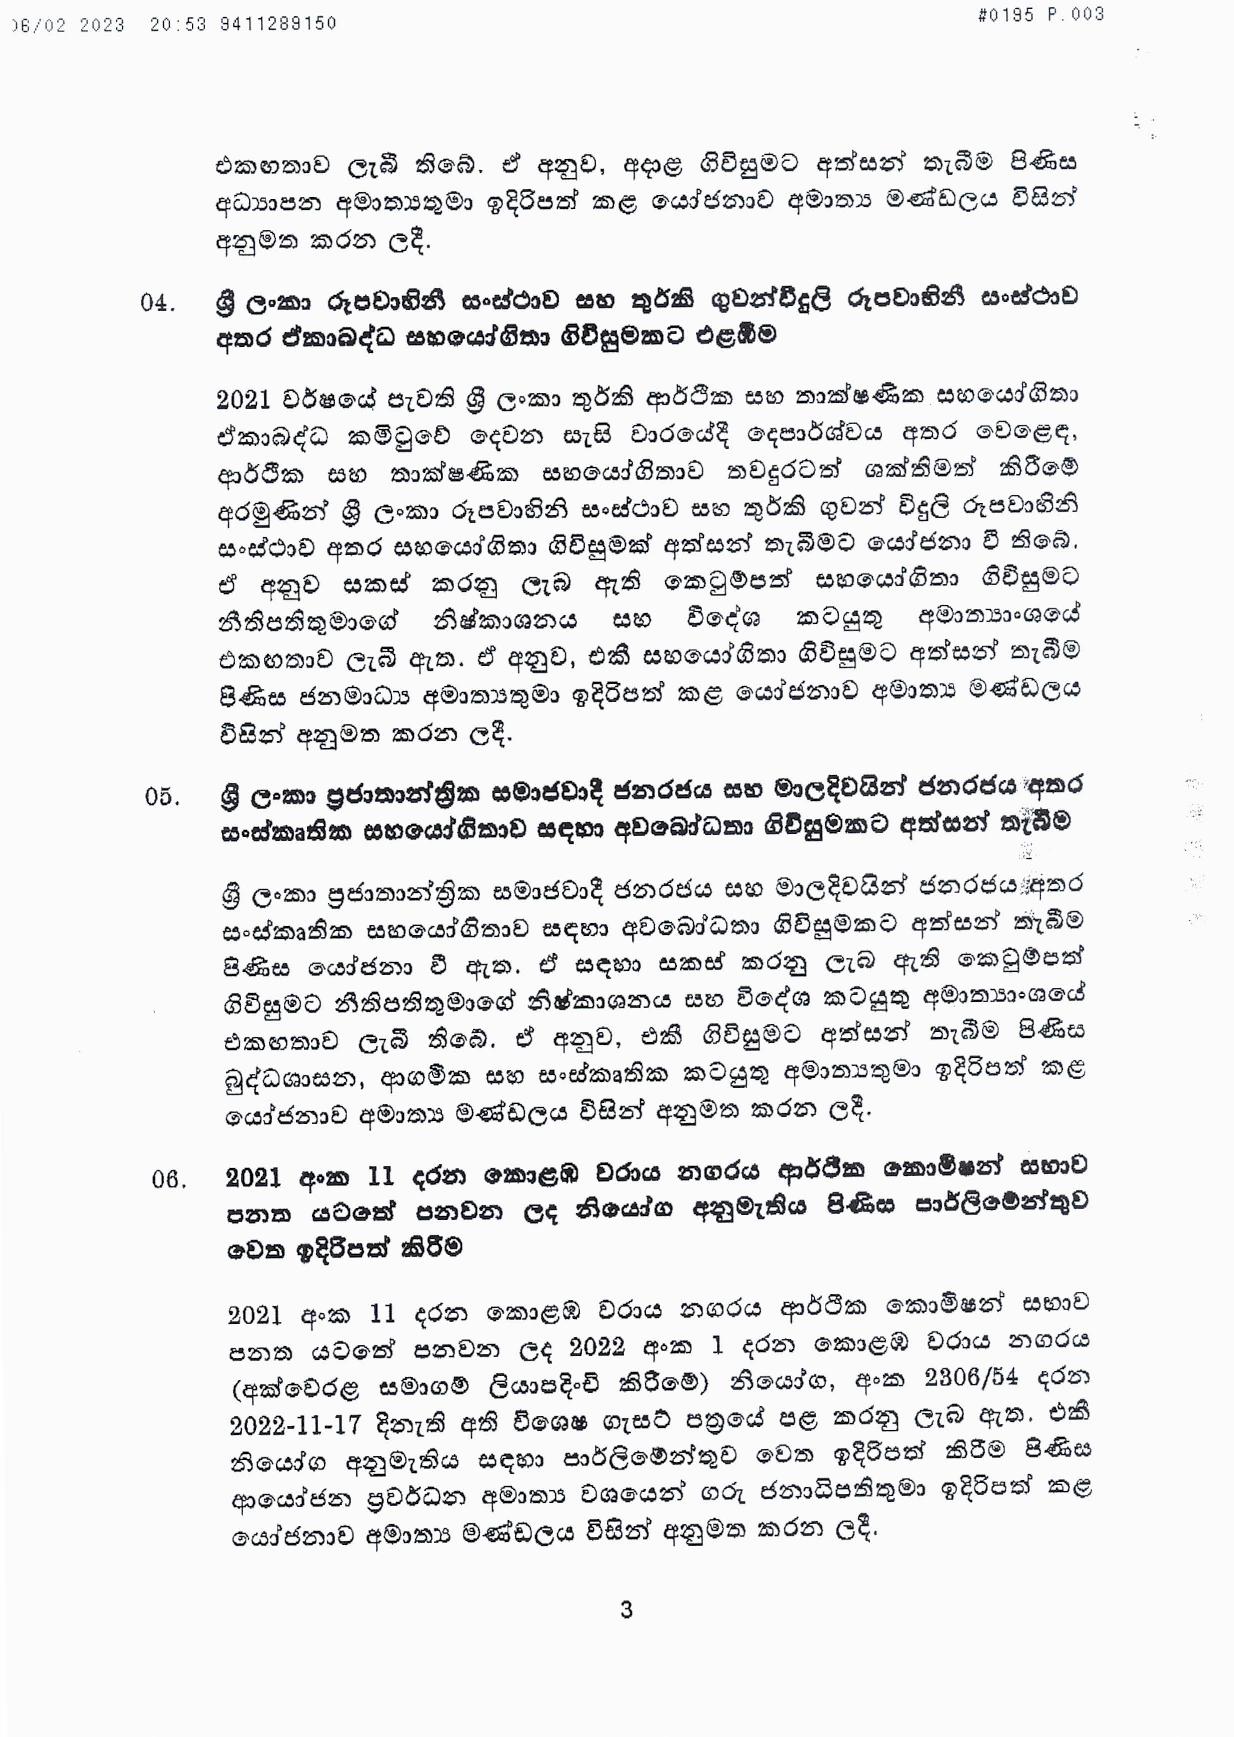 Cabinet Decision on 06.02.2023 page 003